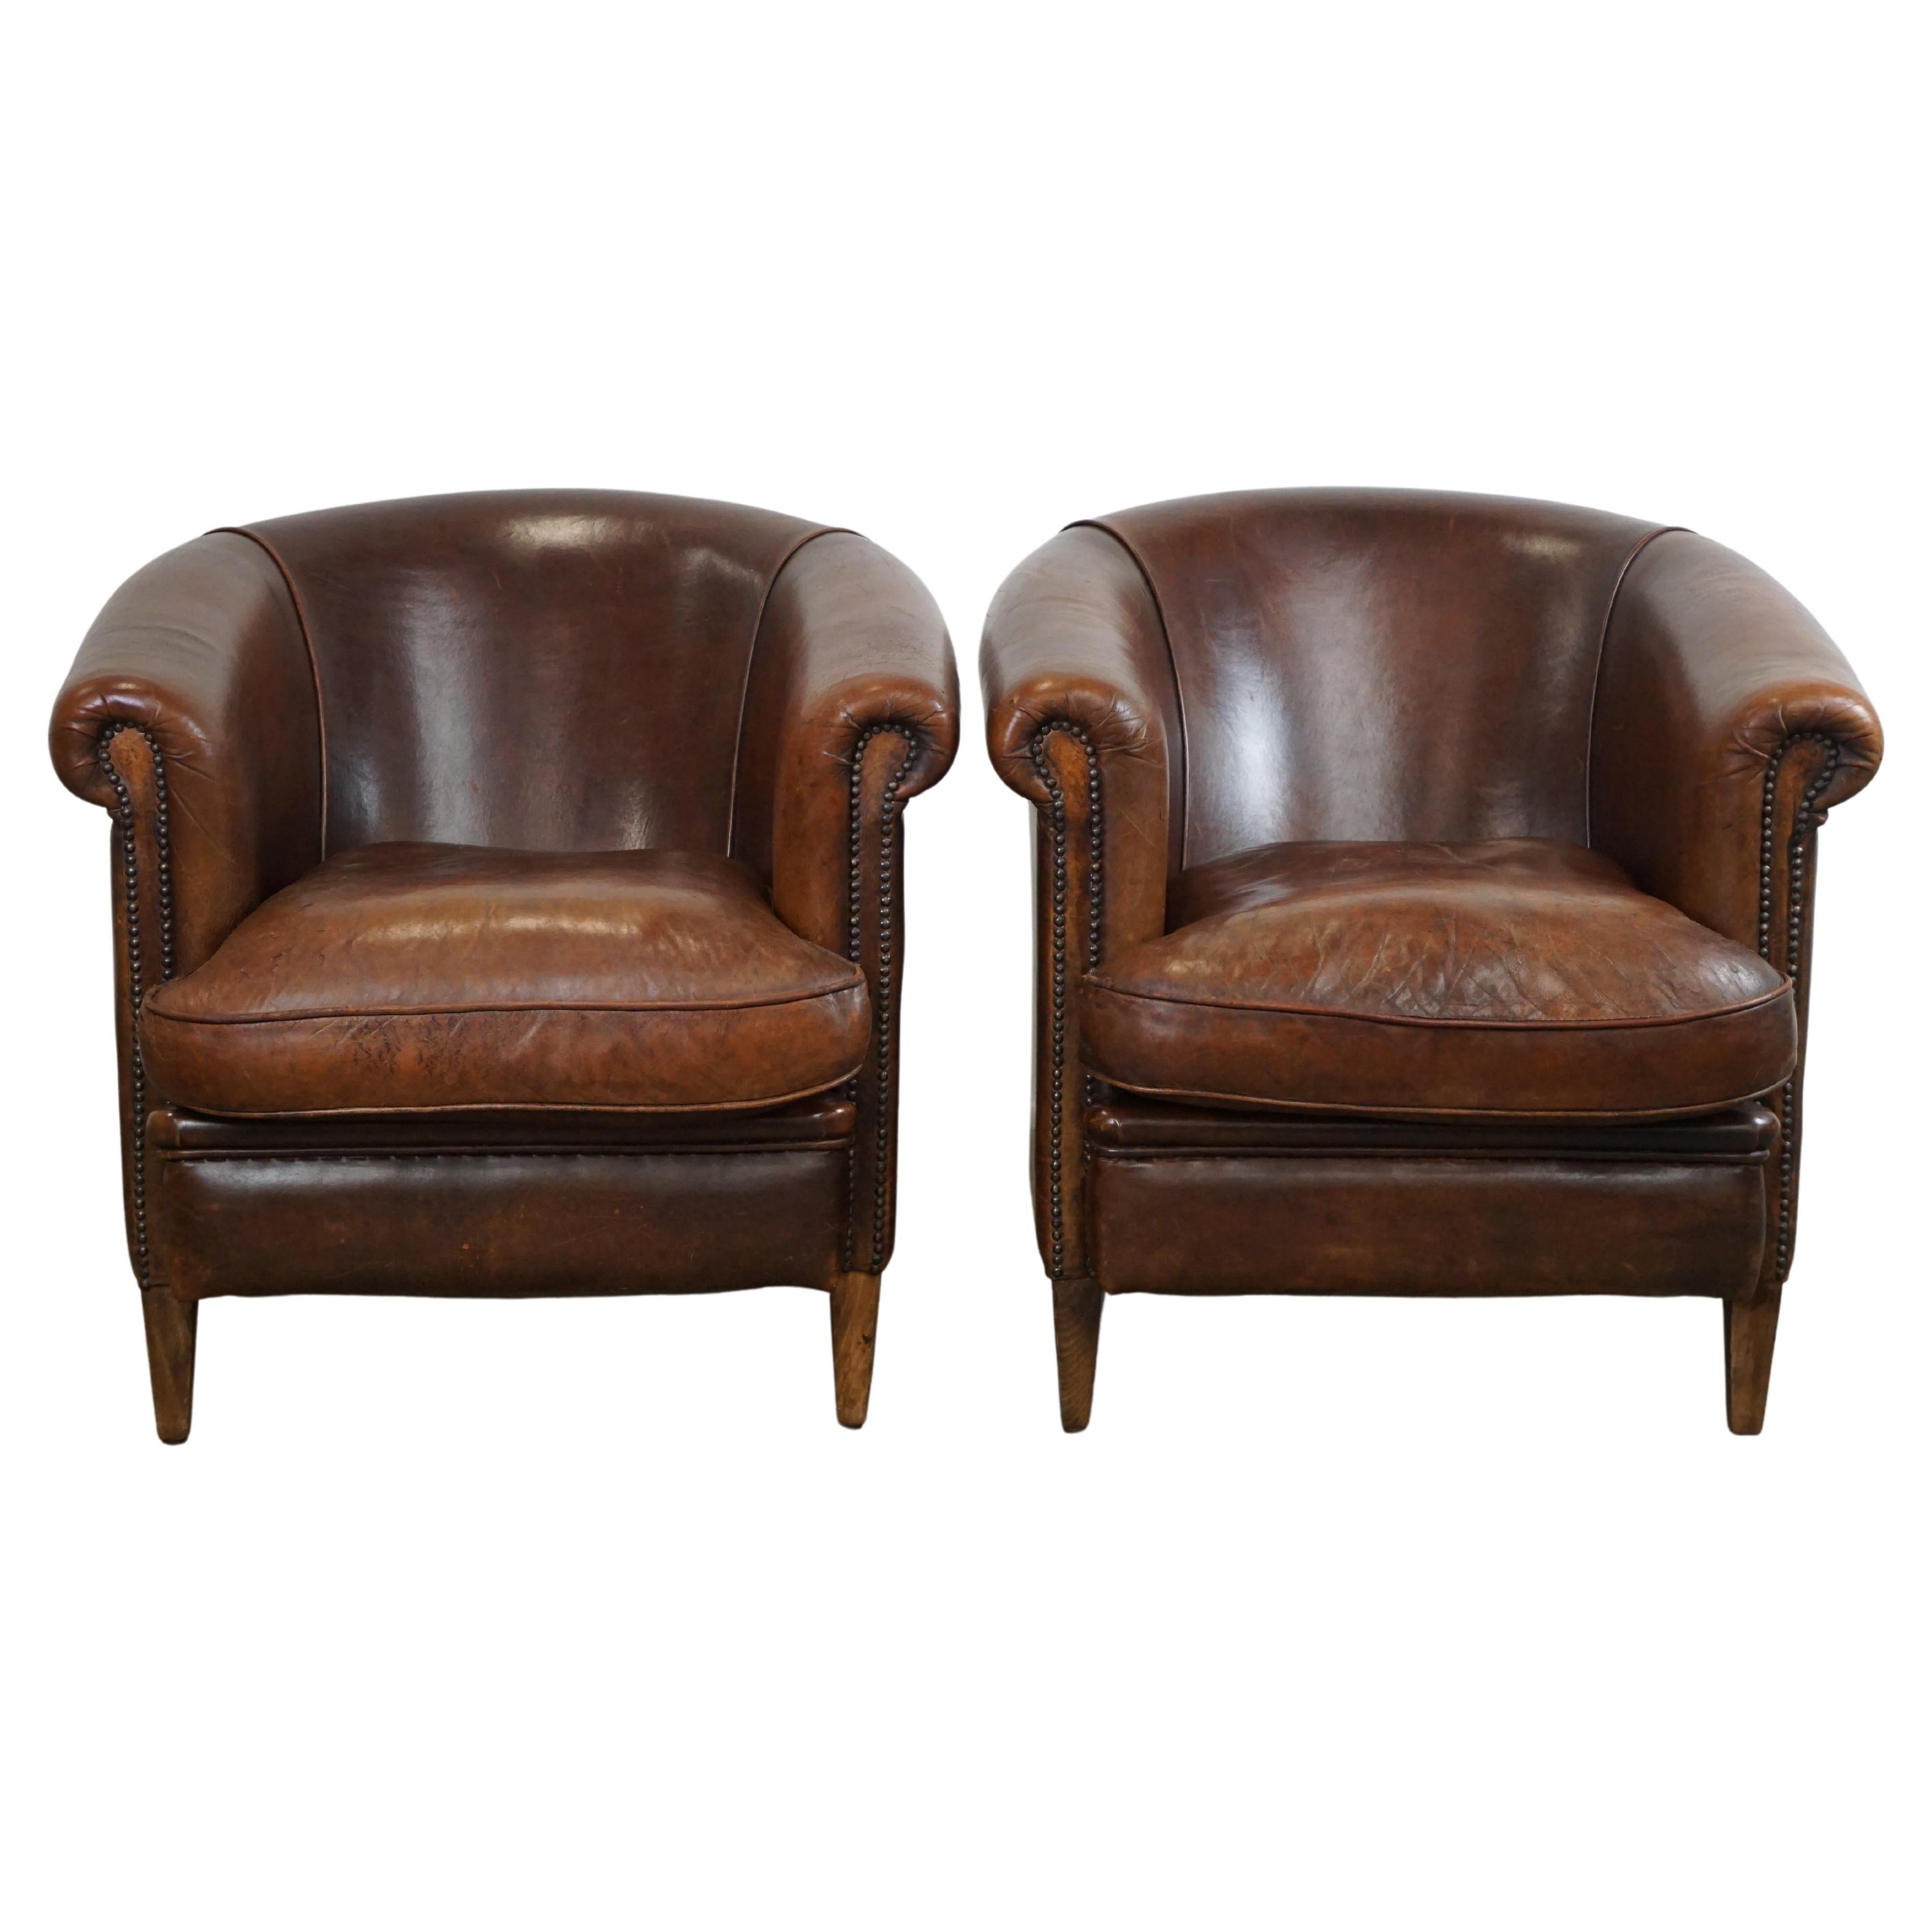 What is the best leather for chairs?